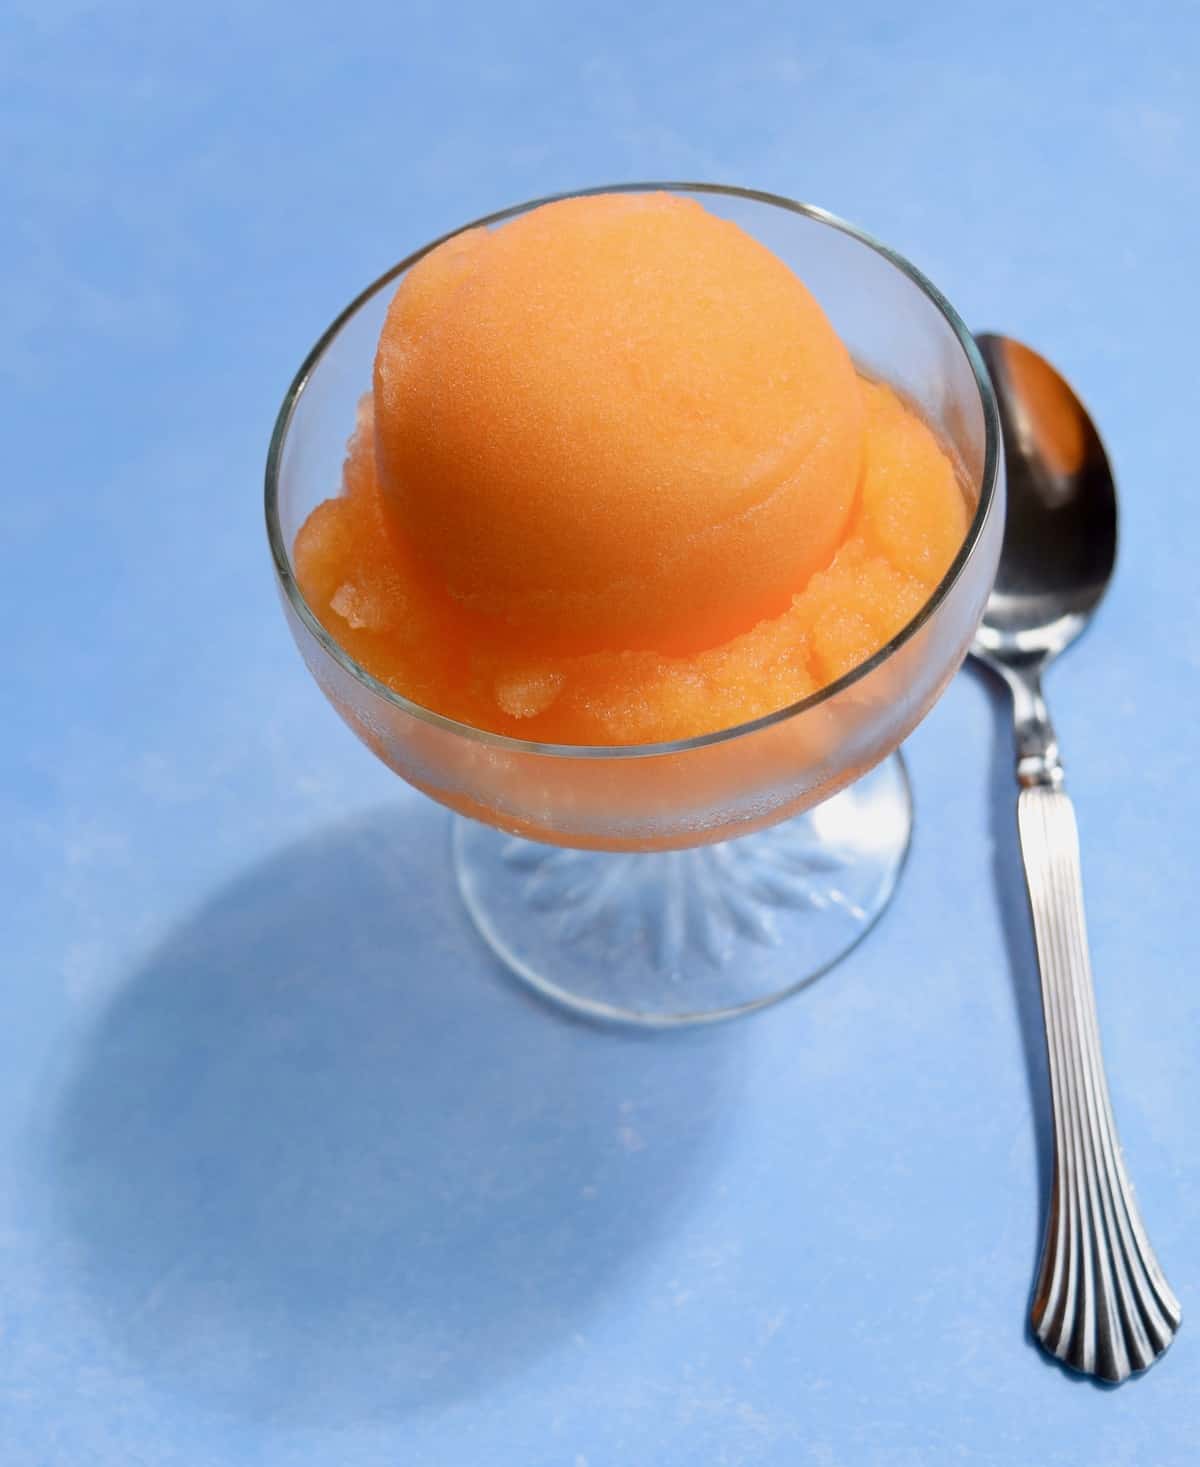 scoop of orange sorbet in a glass ice cream dish on blue surface with spoon on surface.